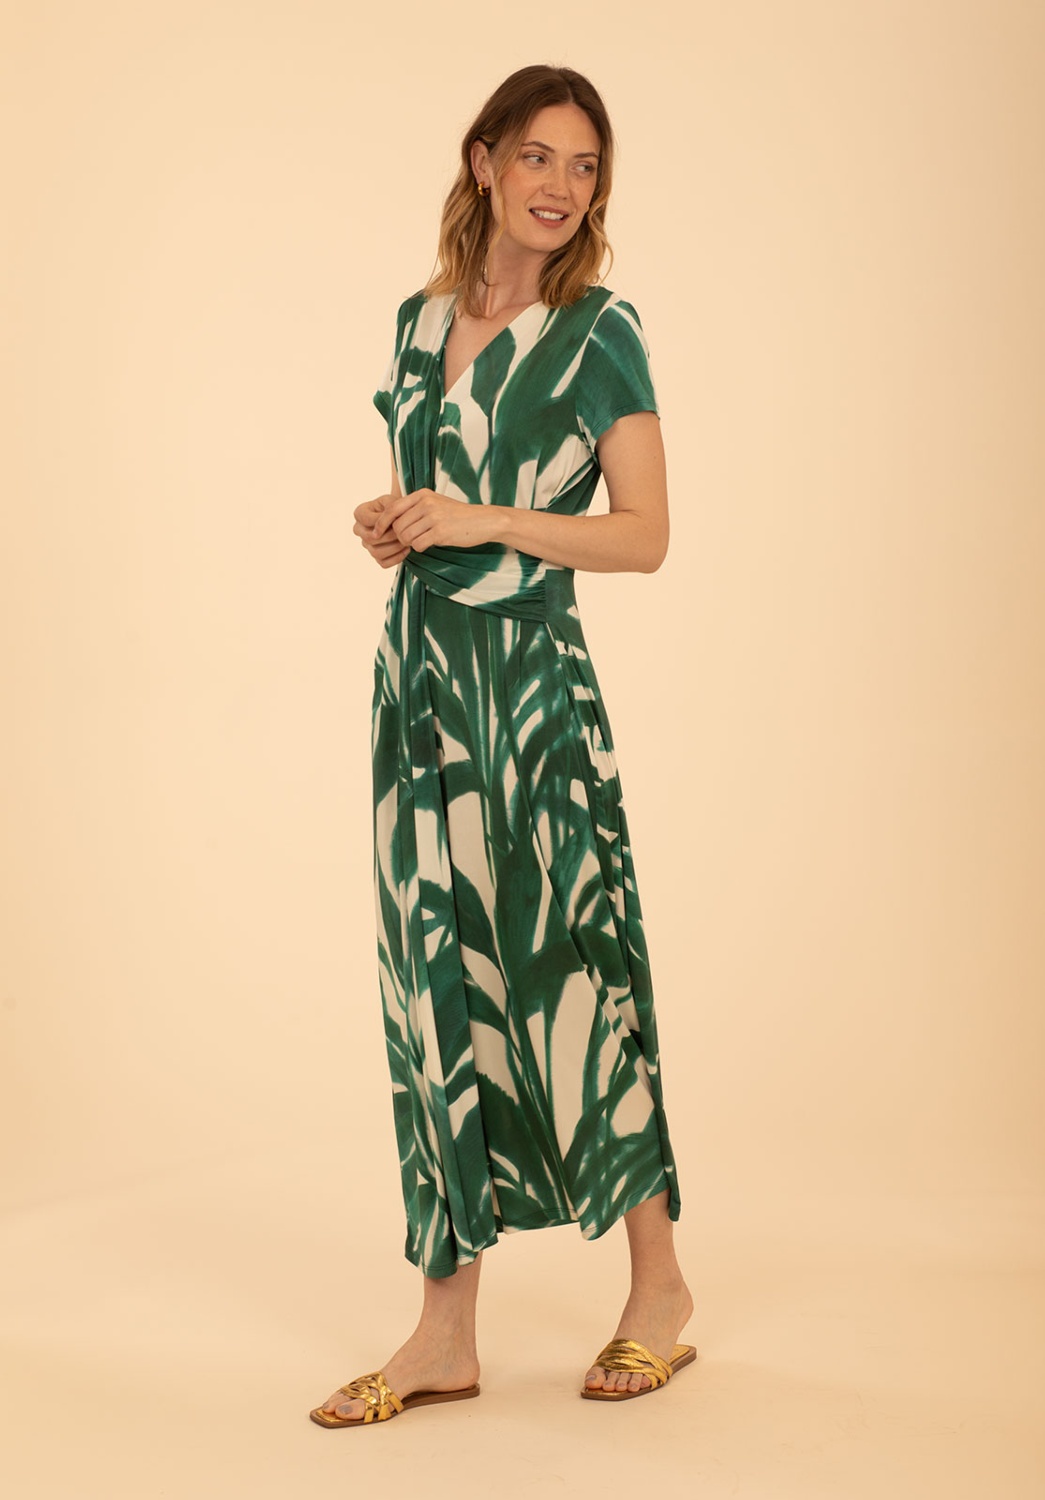 Knotted Leaves Dress 1